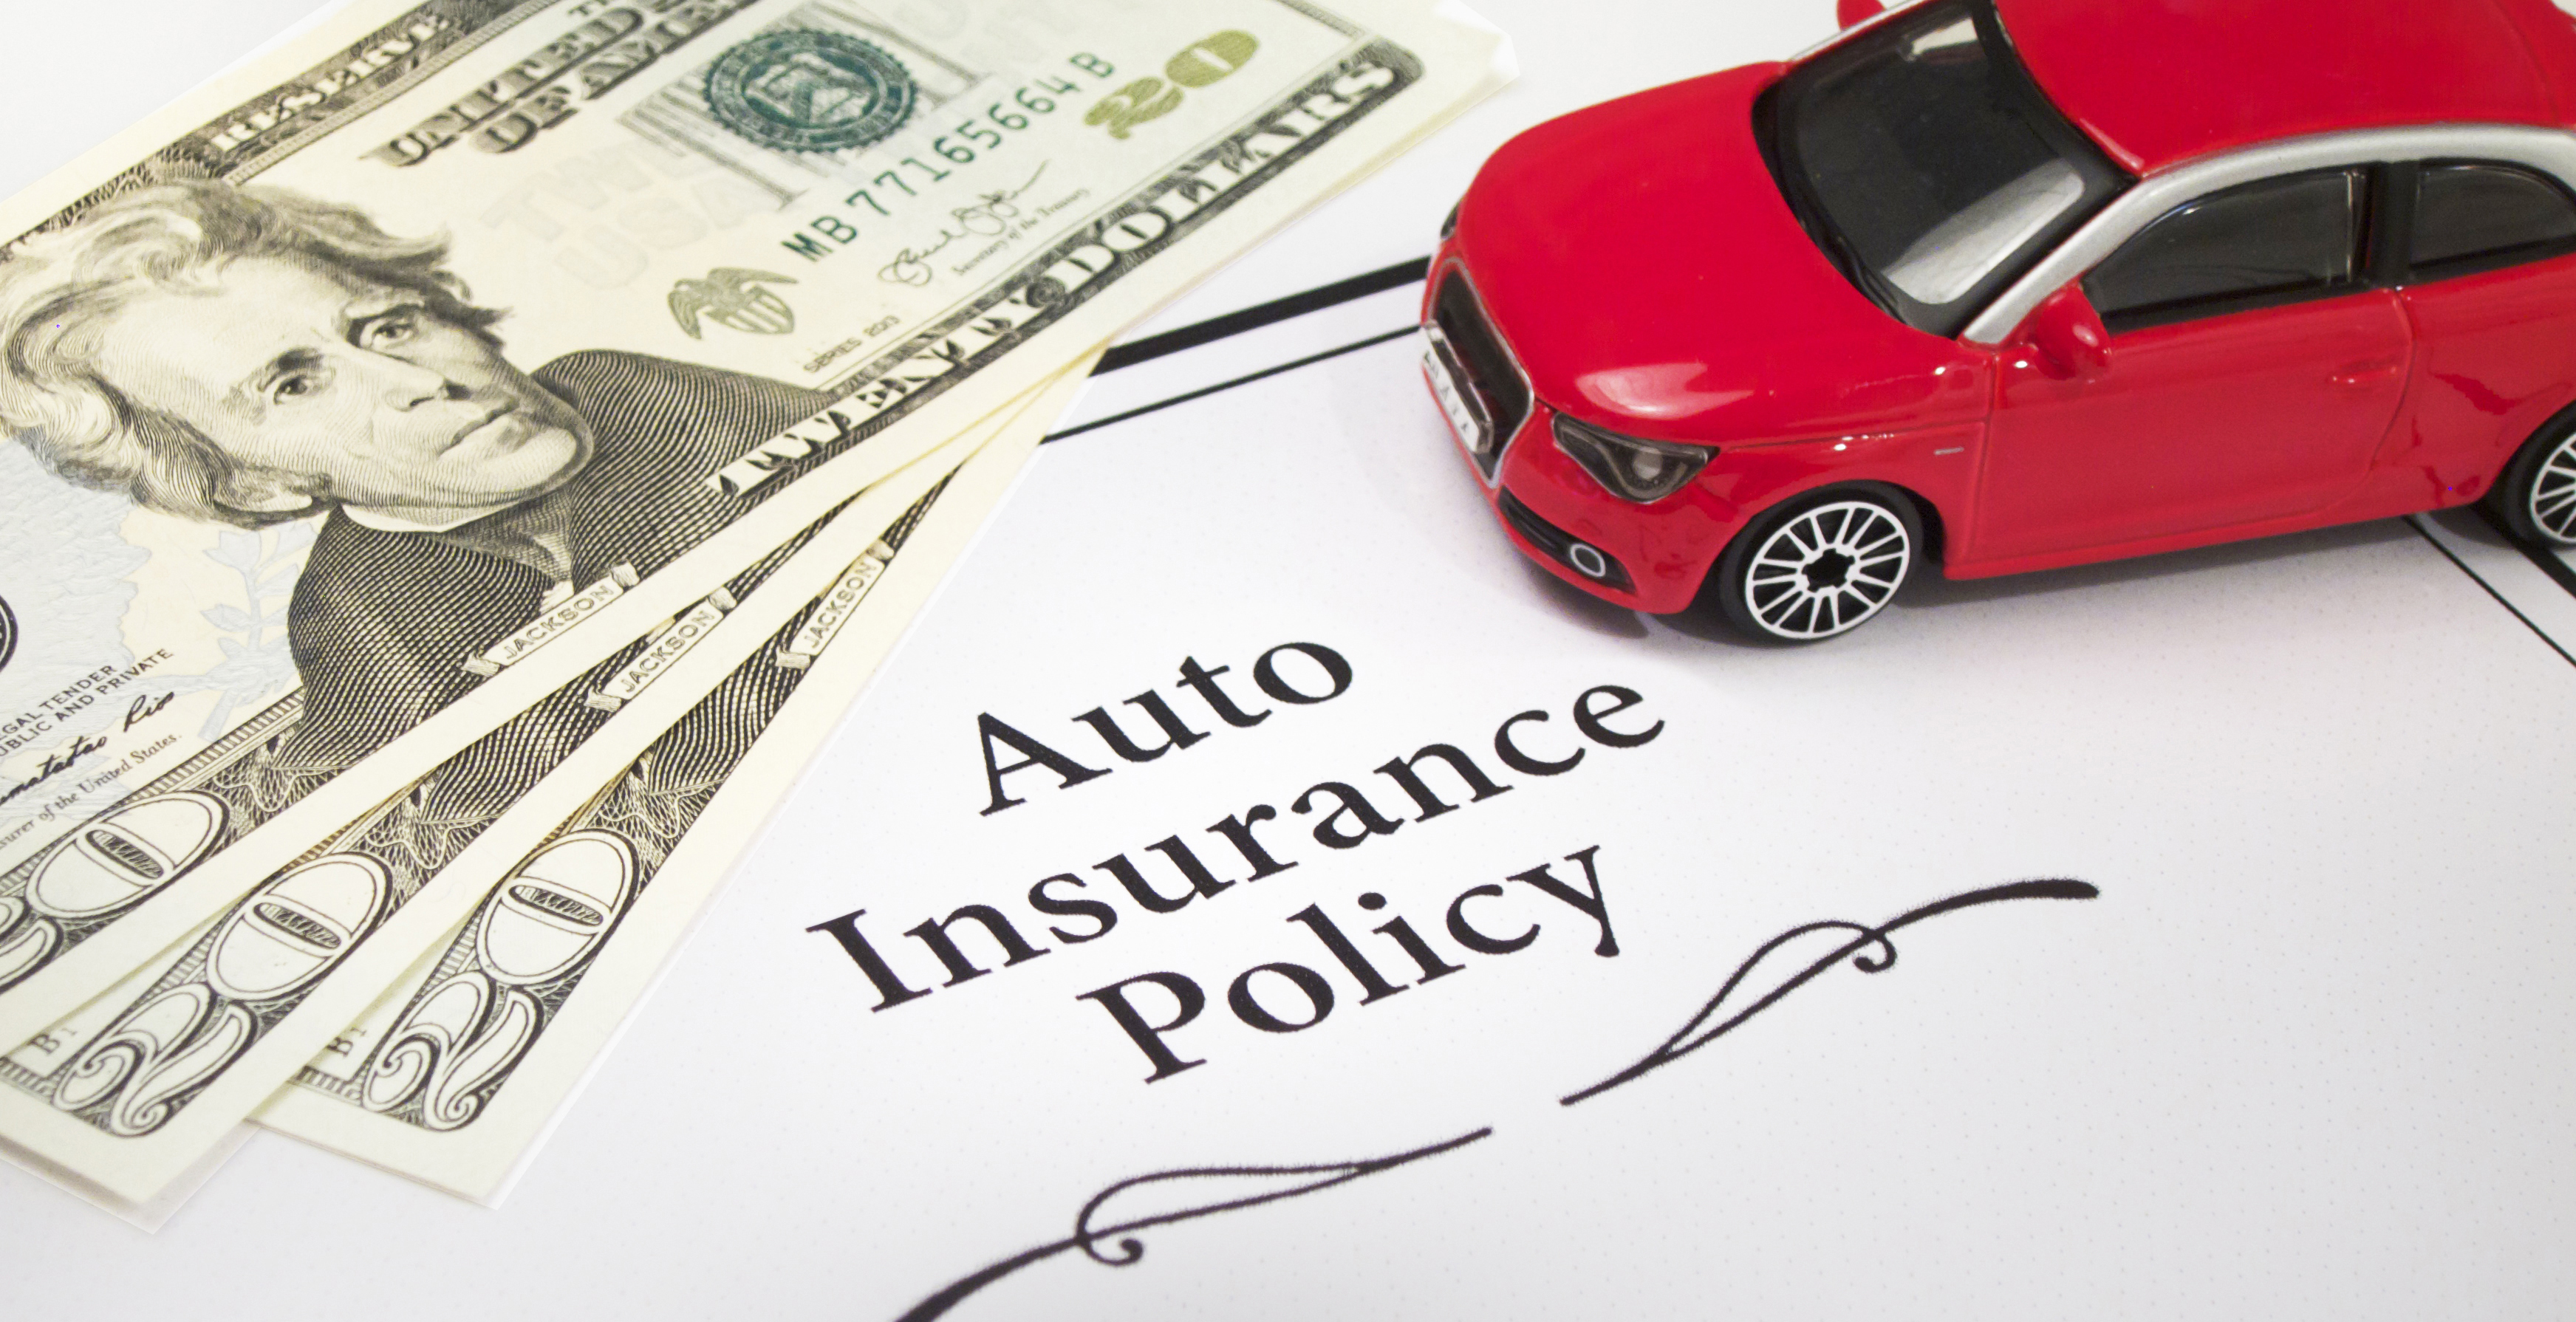 What are some facts about Nationwide auto insurance?